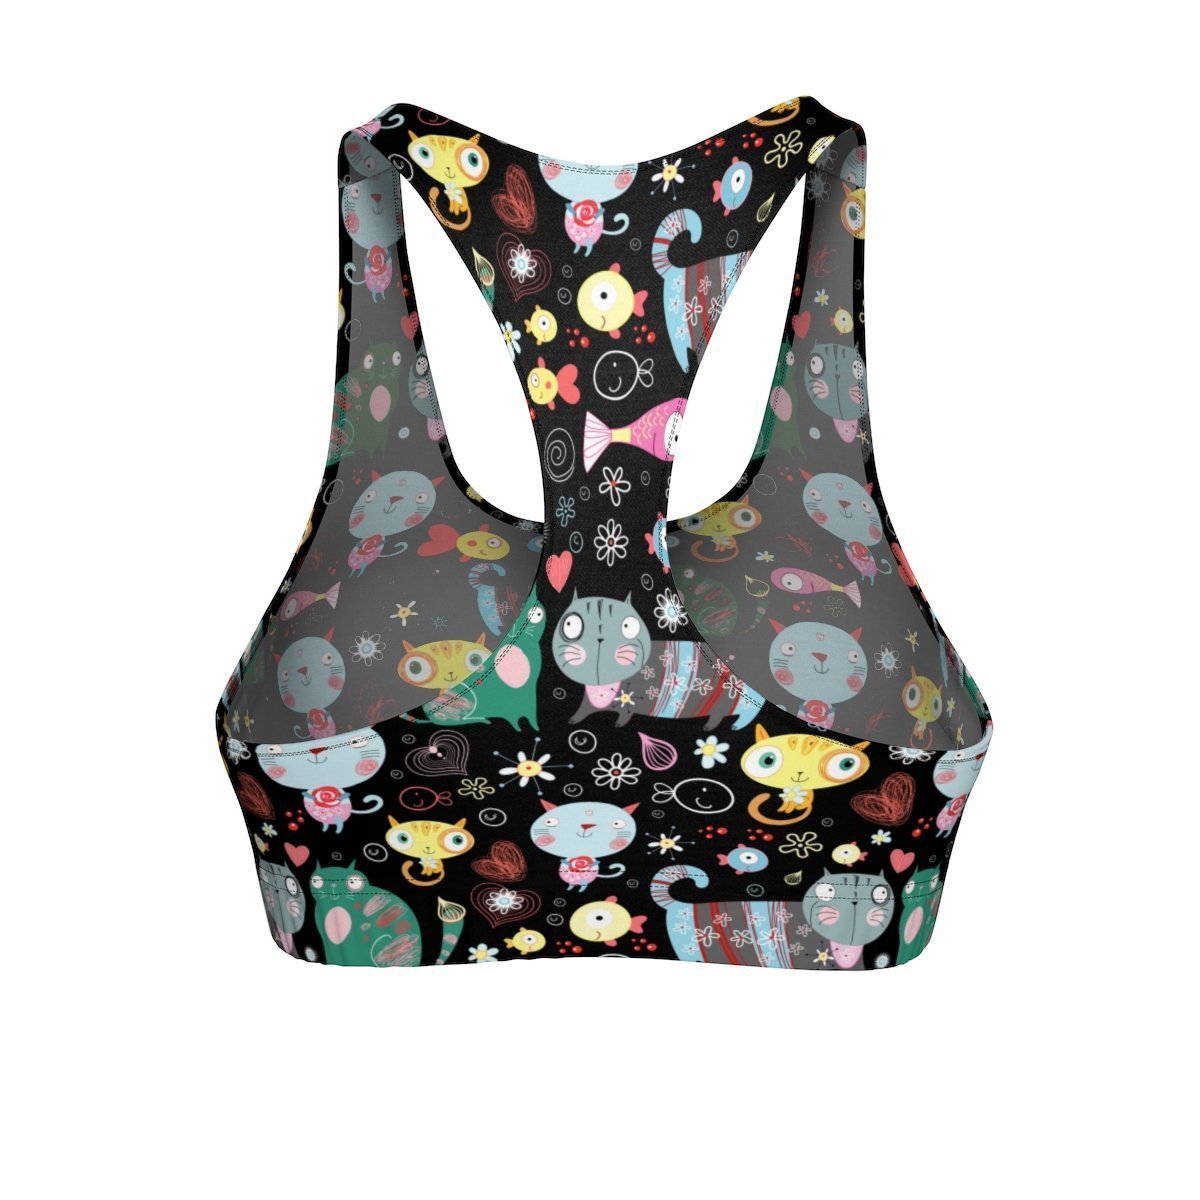 Racerback cat sports bra for women featuring colorful cats printed on a black fabric